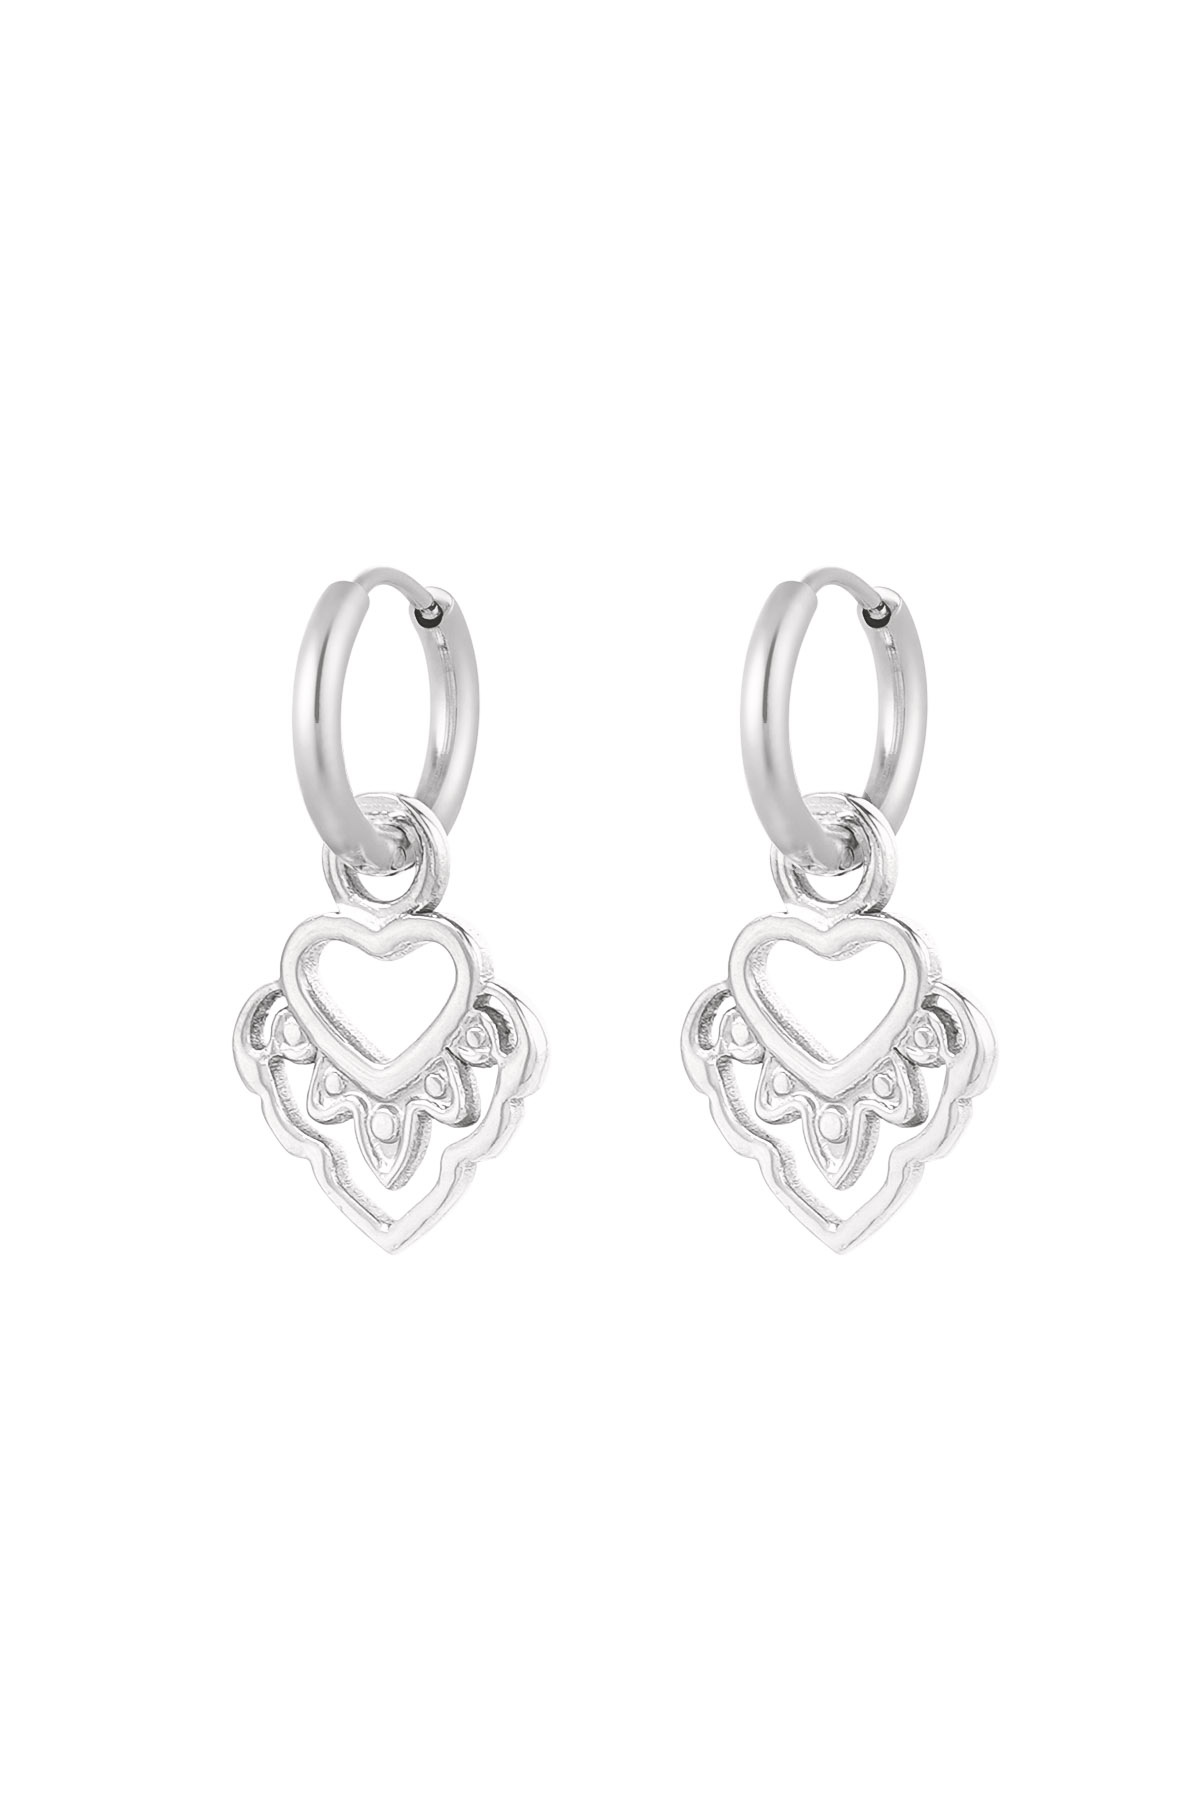 Earrings heart with details - silver